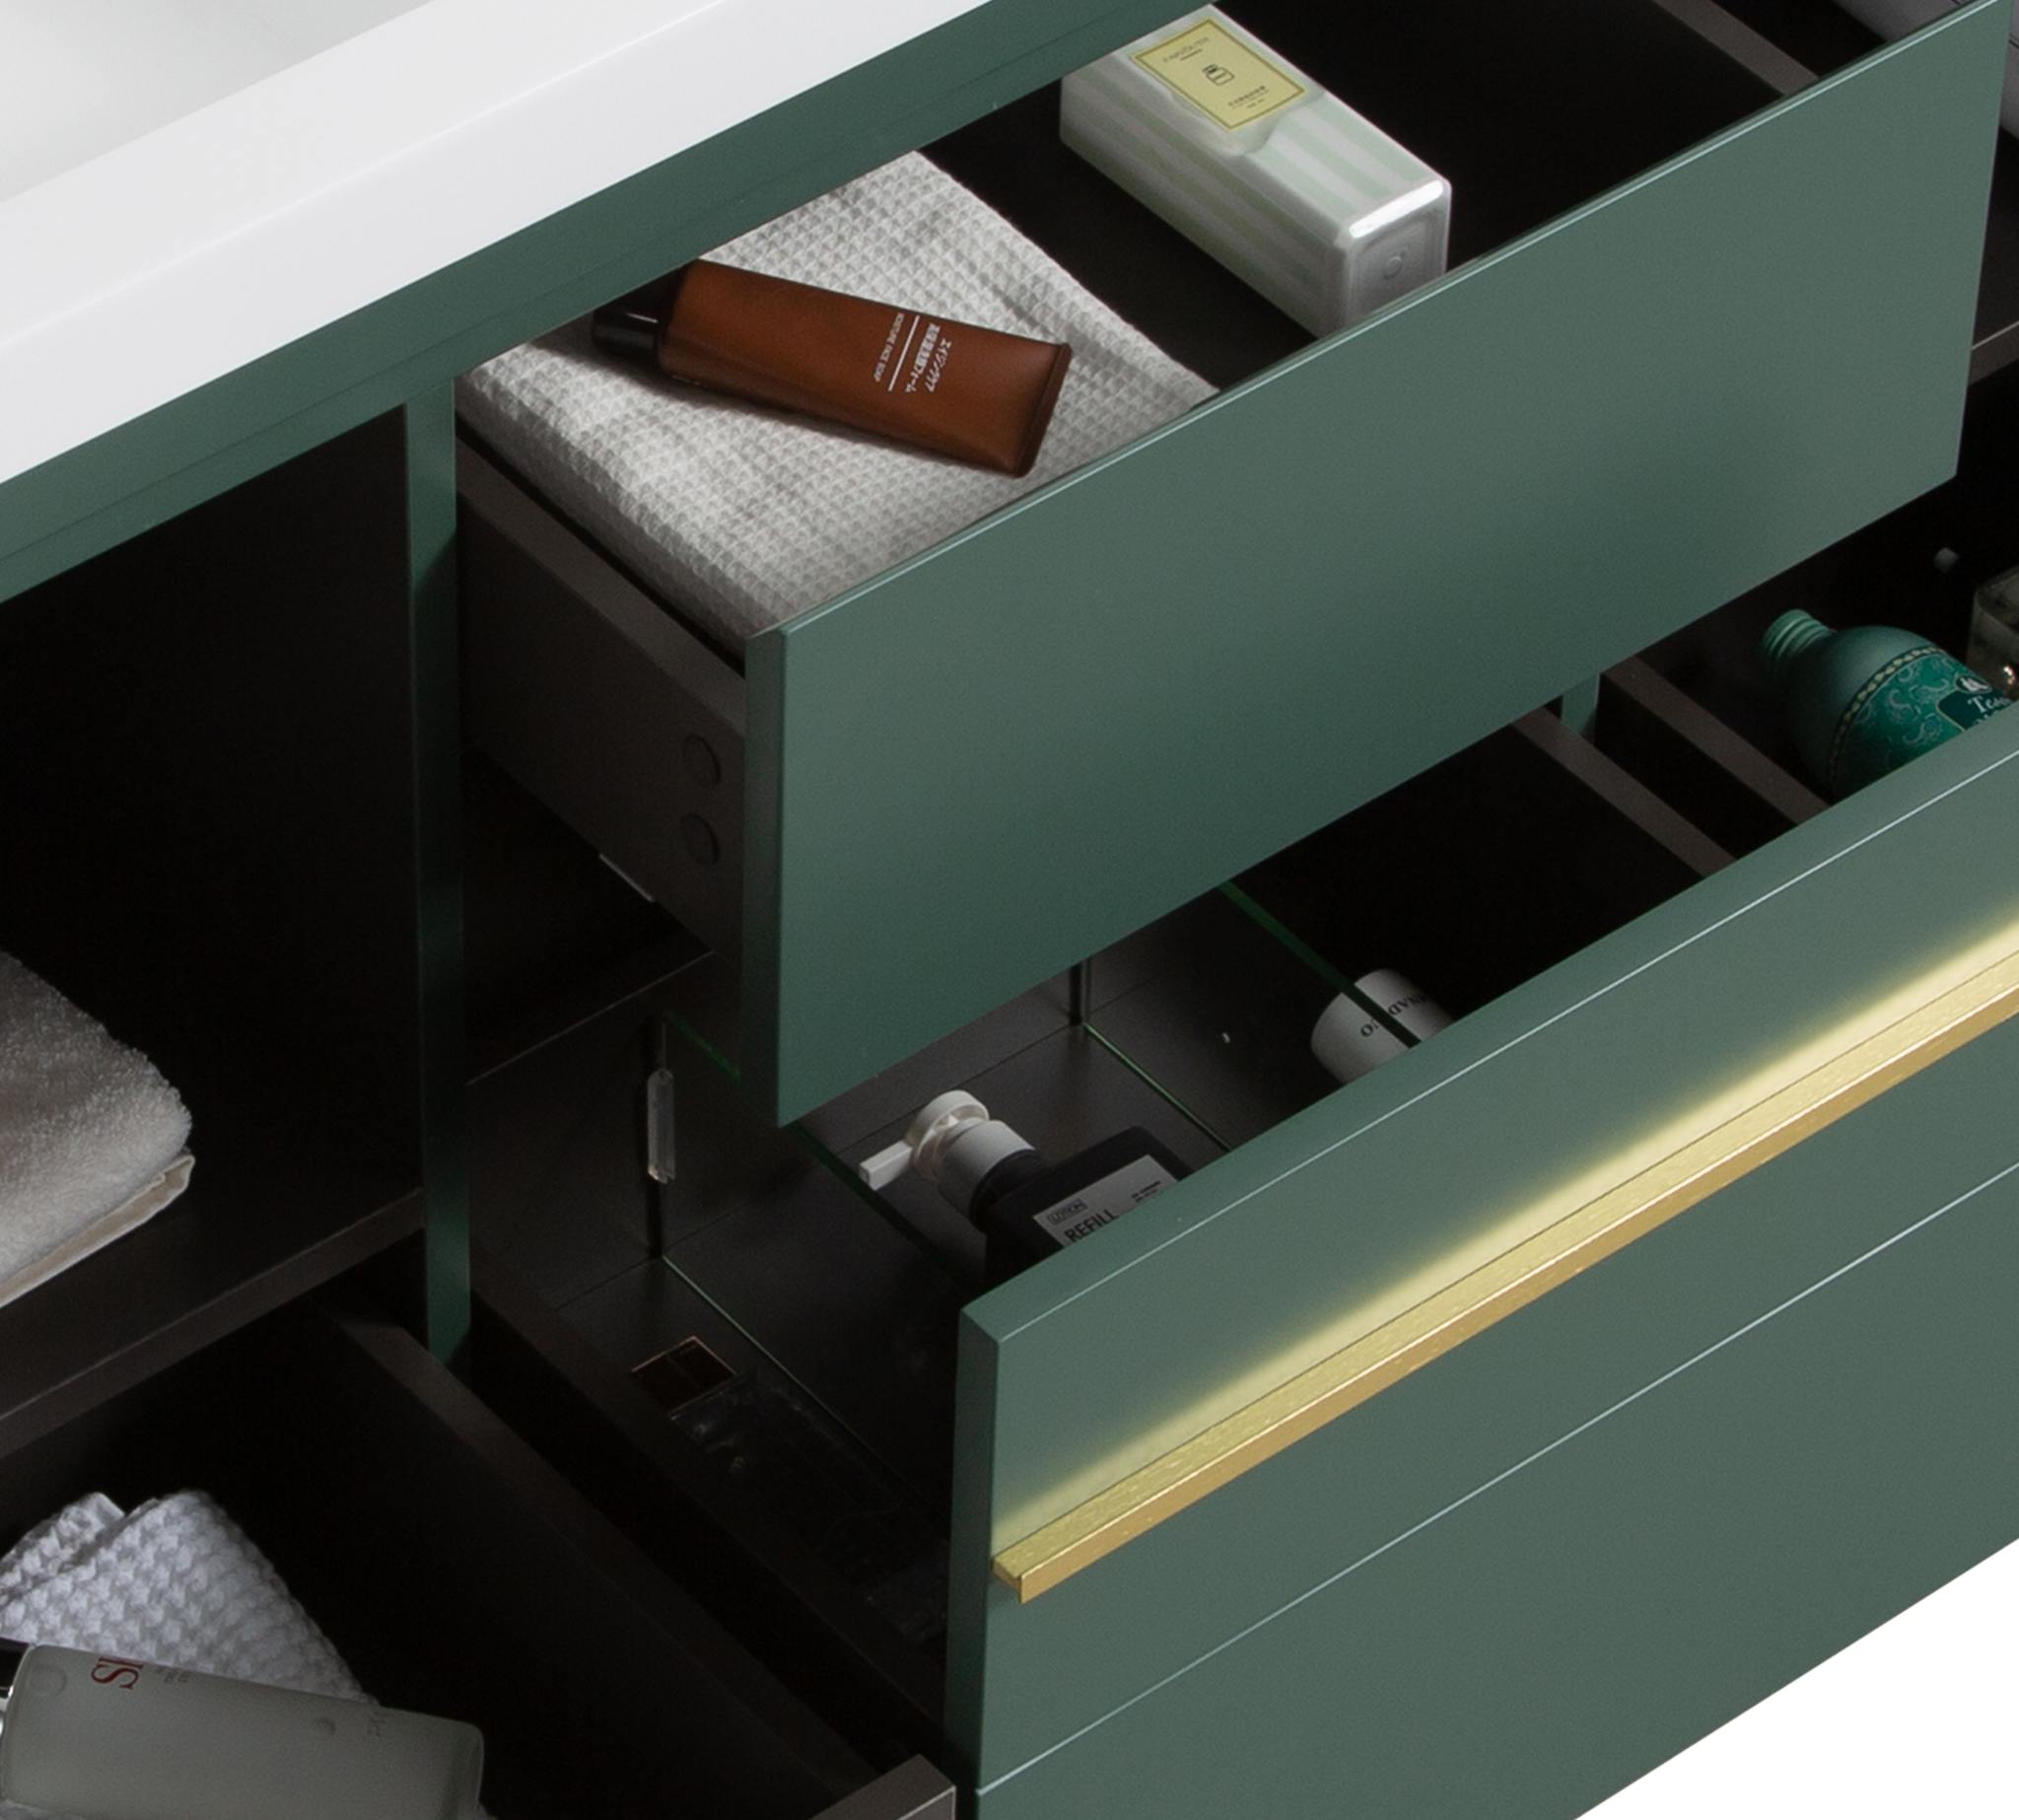 Granada 47.5 Nordic Green With Brush Gold Handle Cabinet, Square Cultured Marble Sink, Free Standing Modern Vanity Set